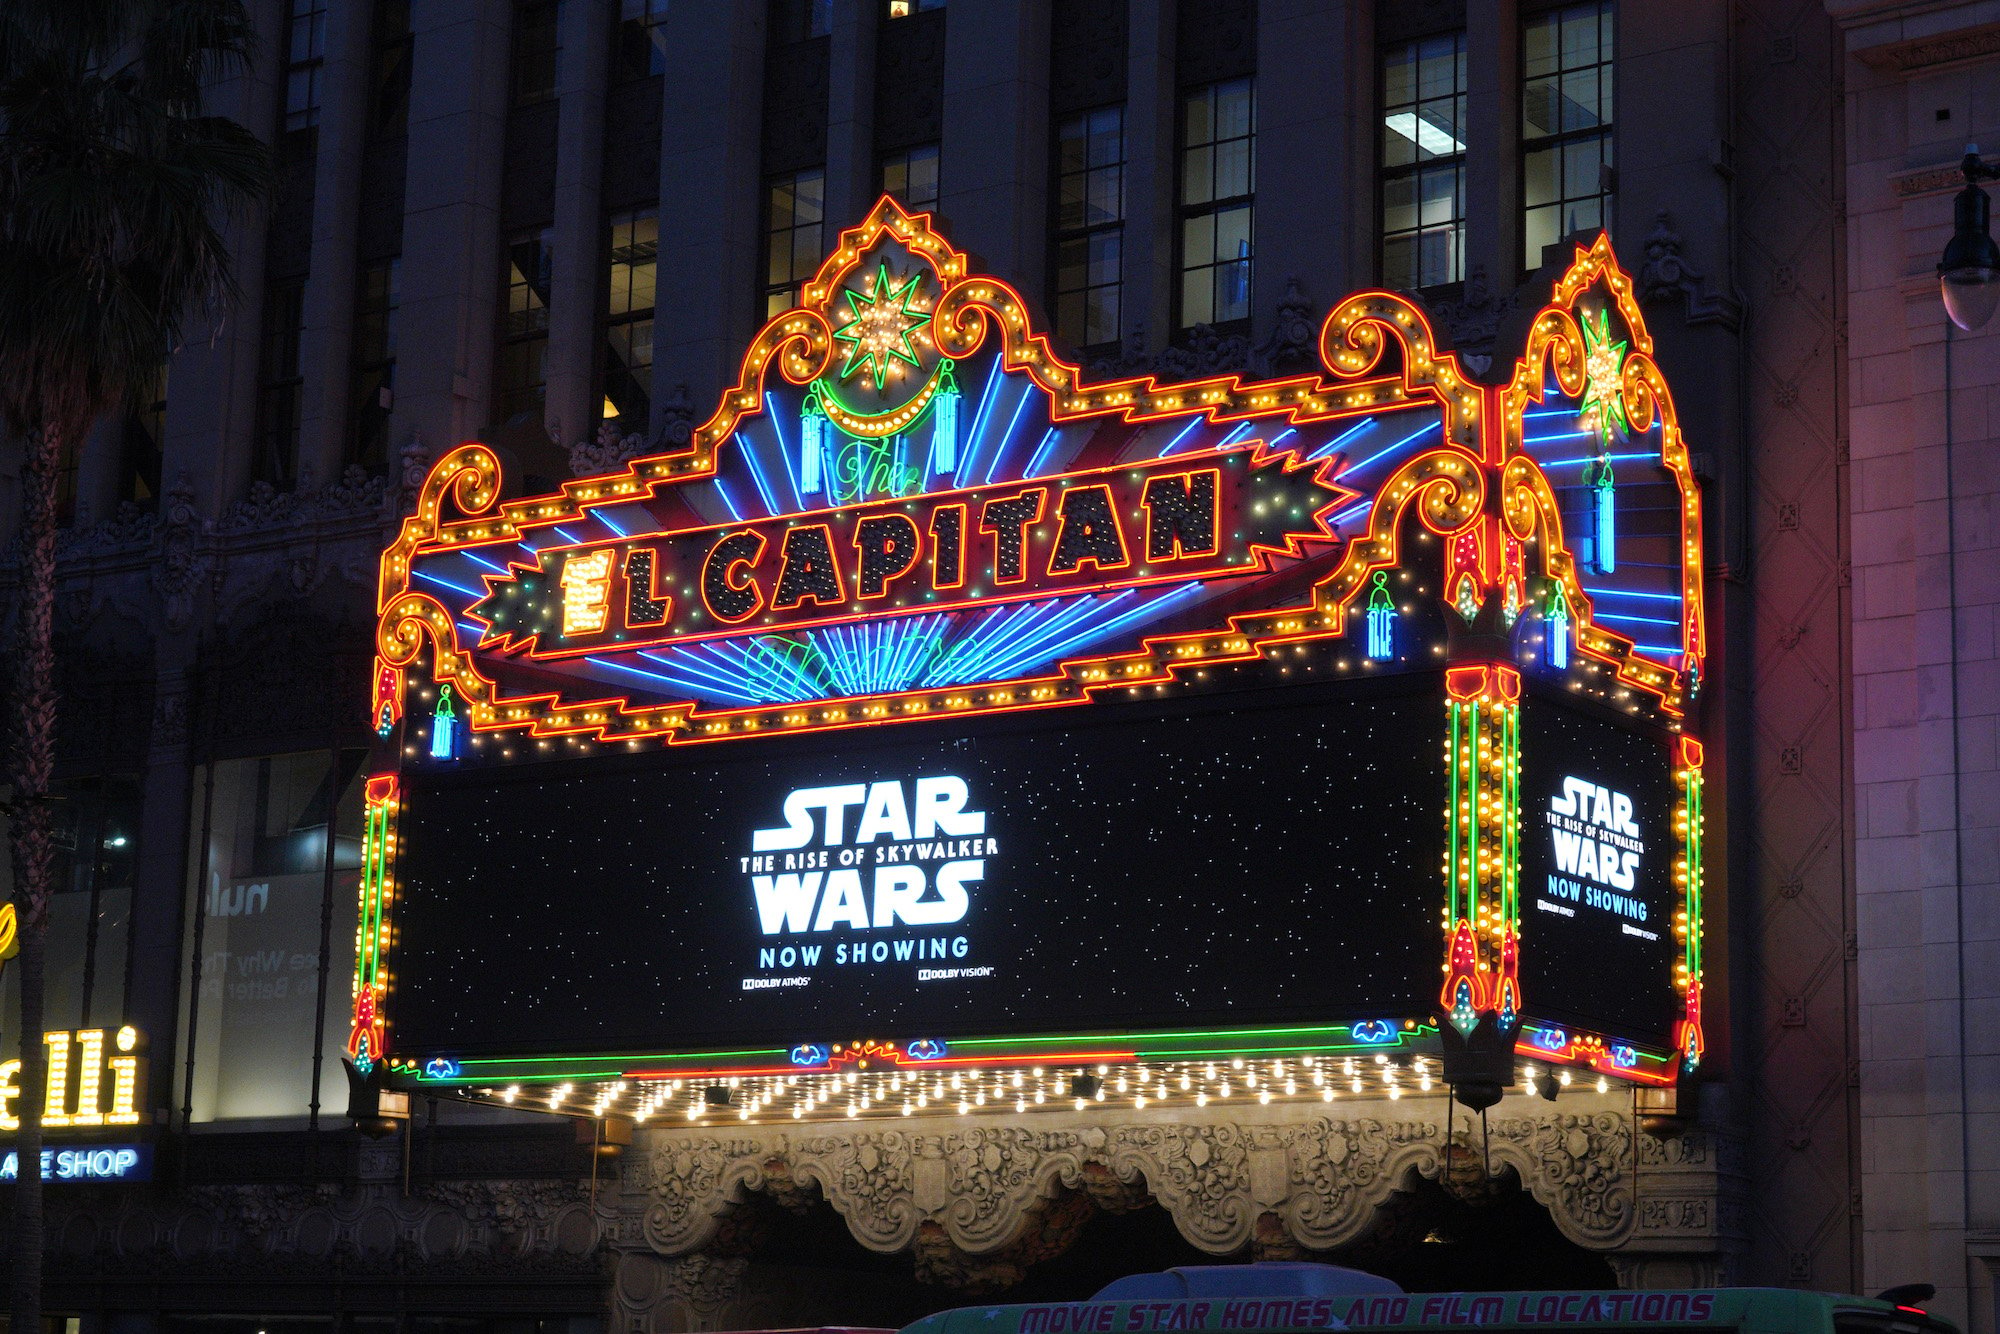 Exterior shot of the marquee of "Star Wars: The Rise Of Skywalker" at the El Capitan Theater